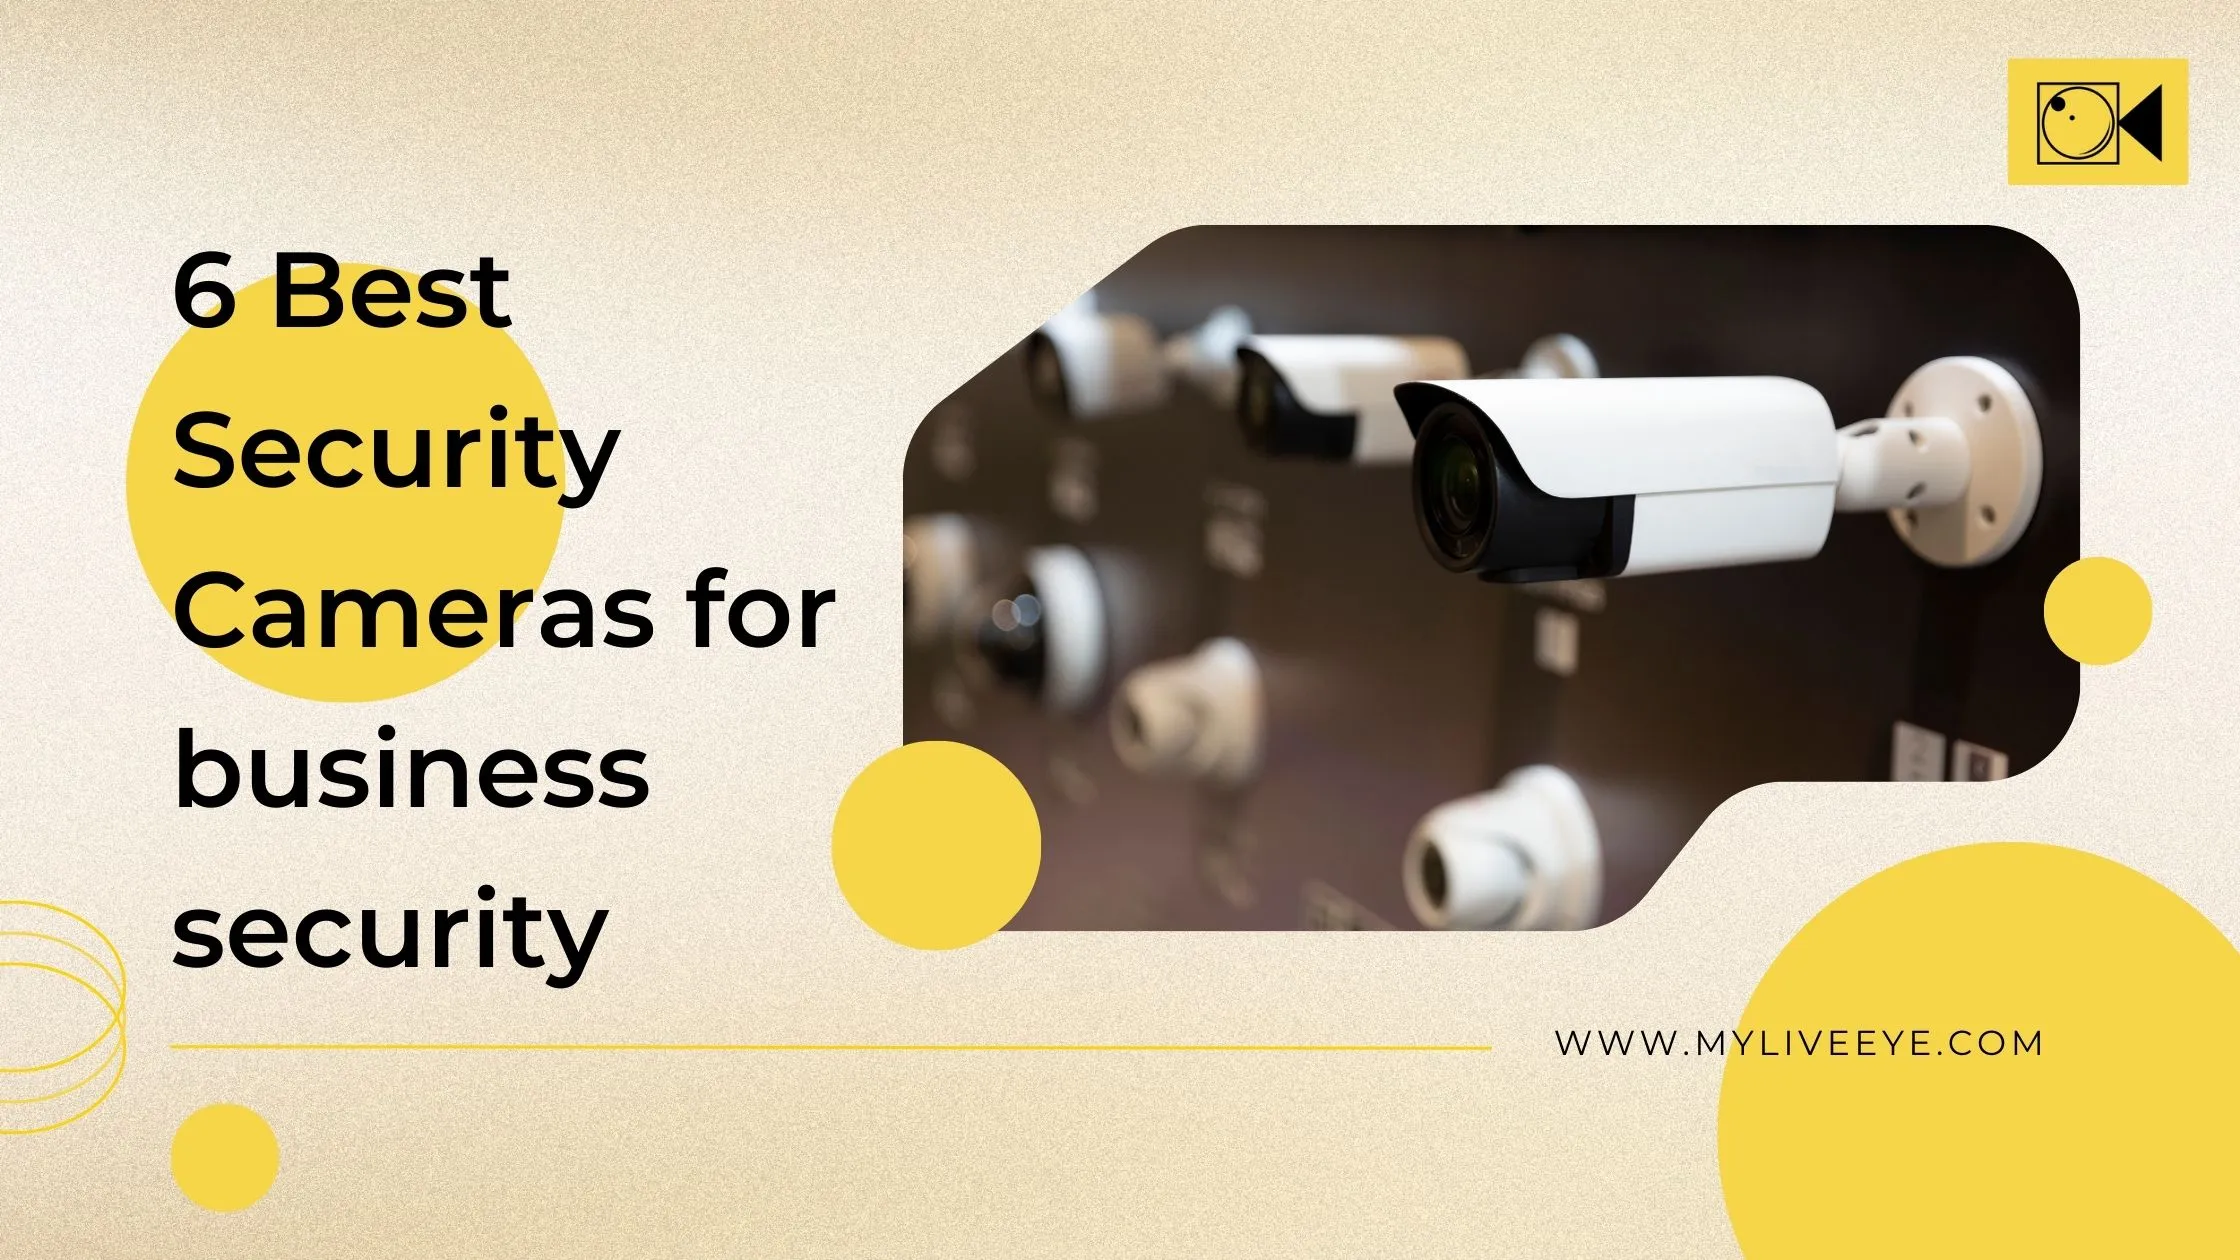 Security cameras for your business